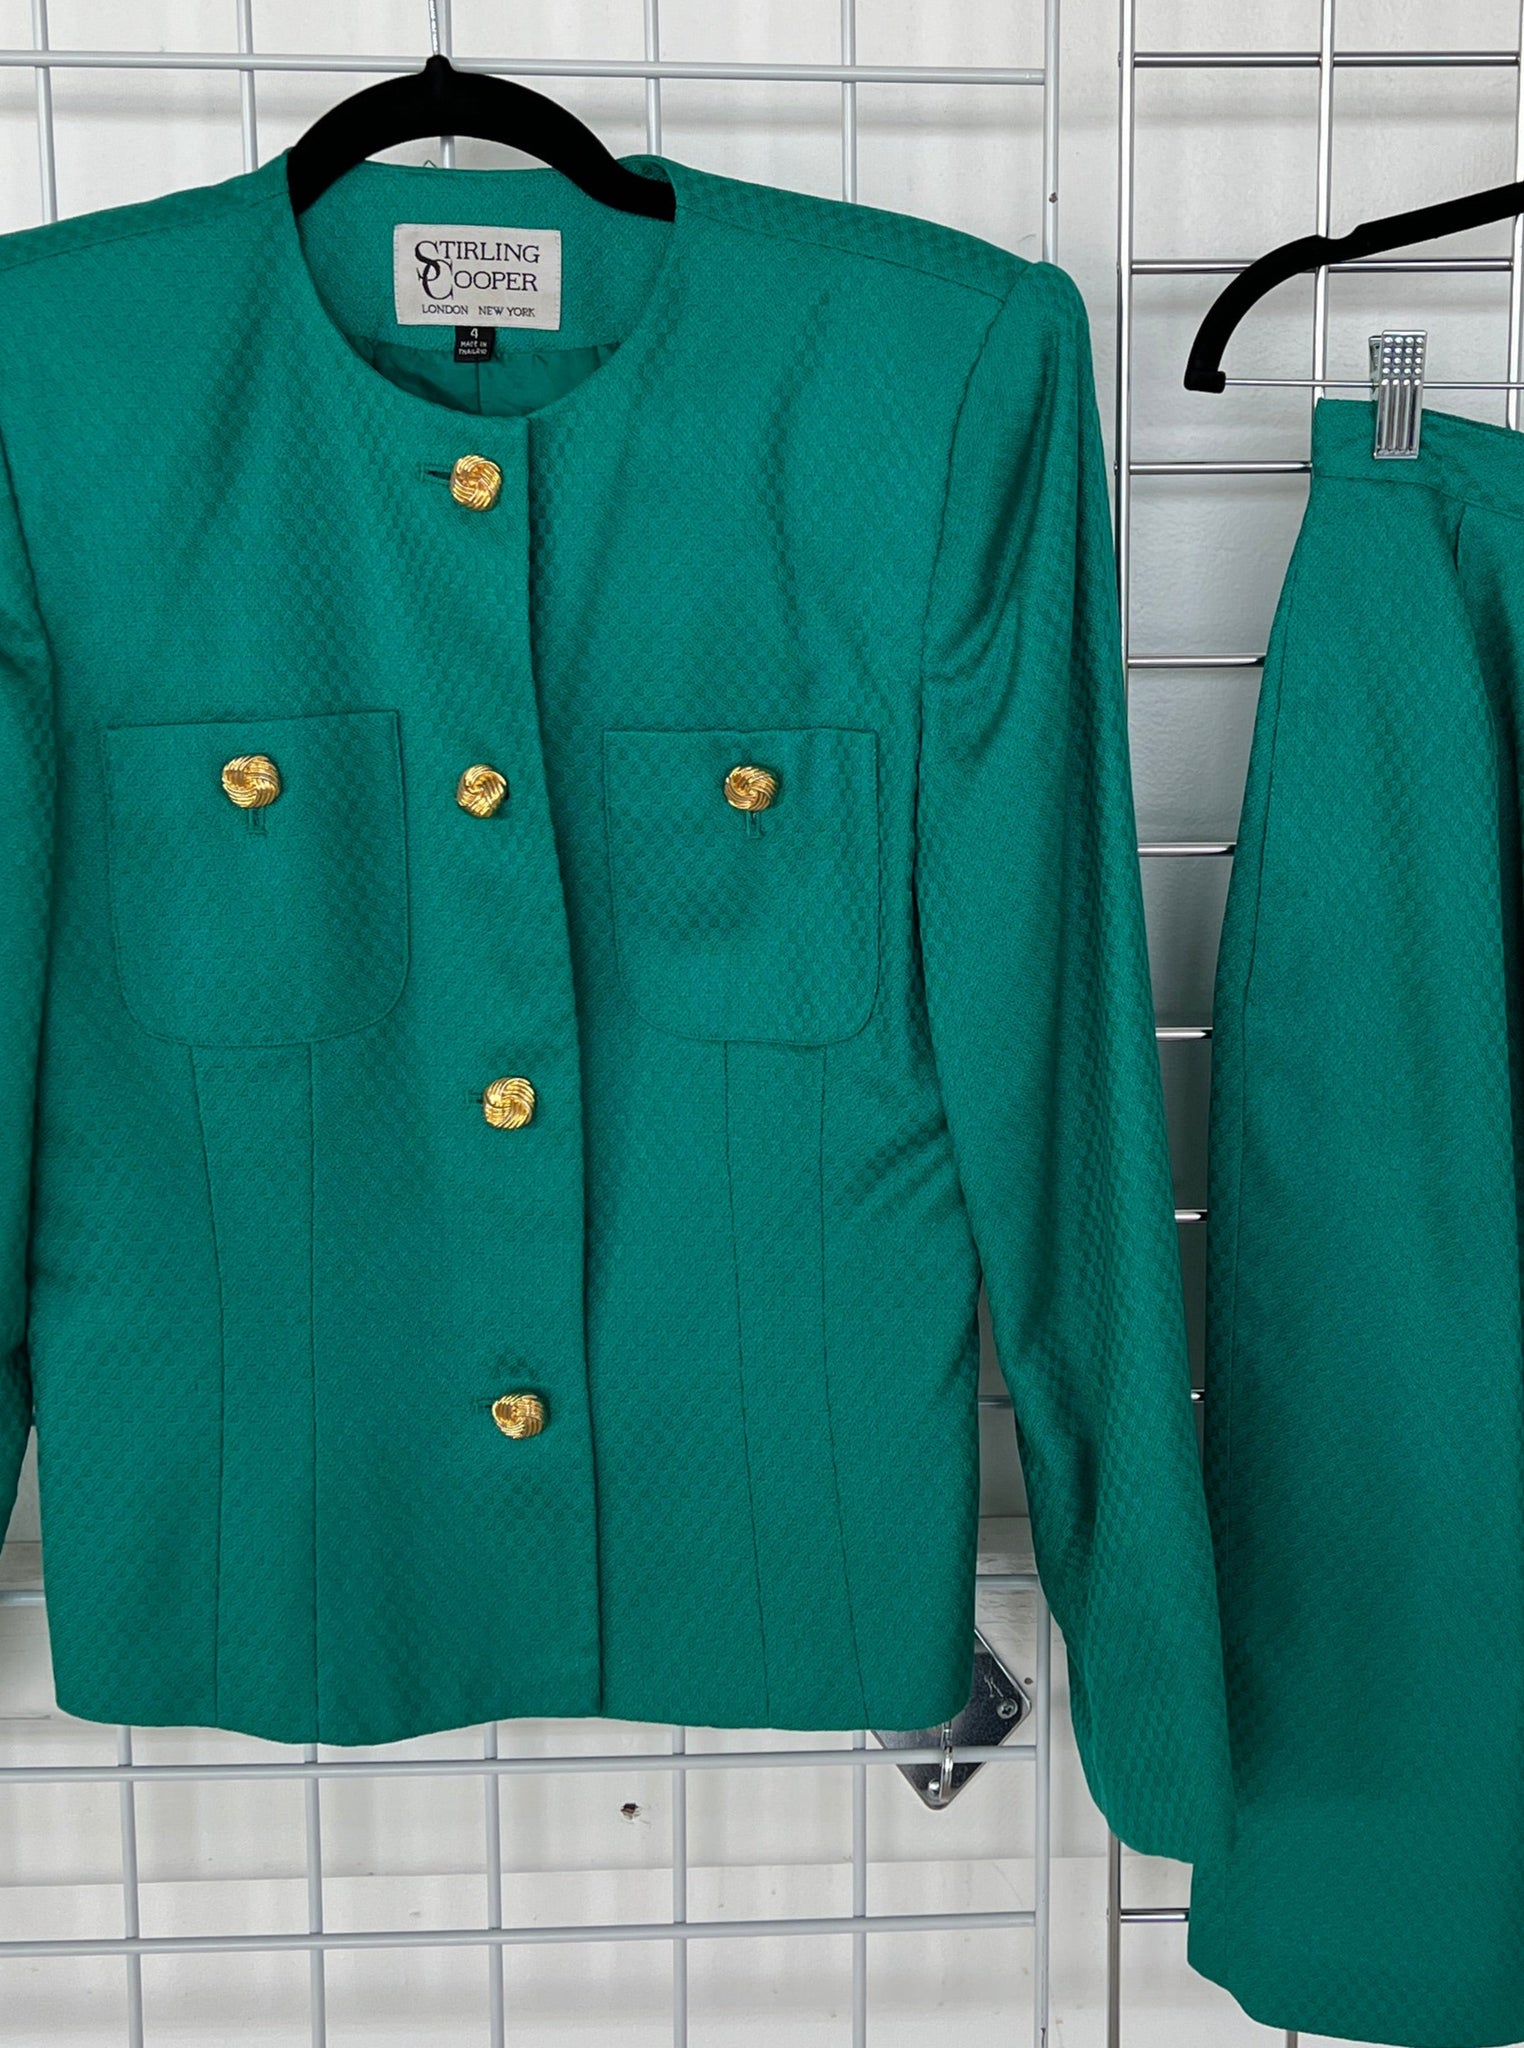 1990's 2 PIECE- SKIRT SUIT- Sterling cooper teal w/ gold buttons